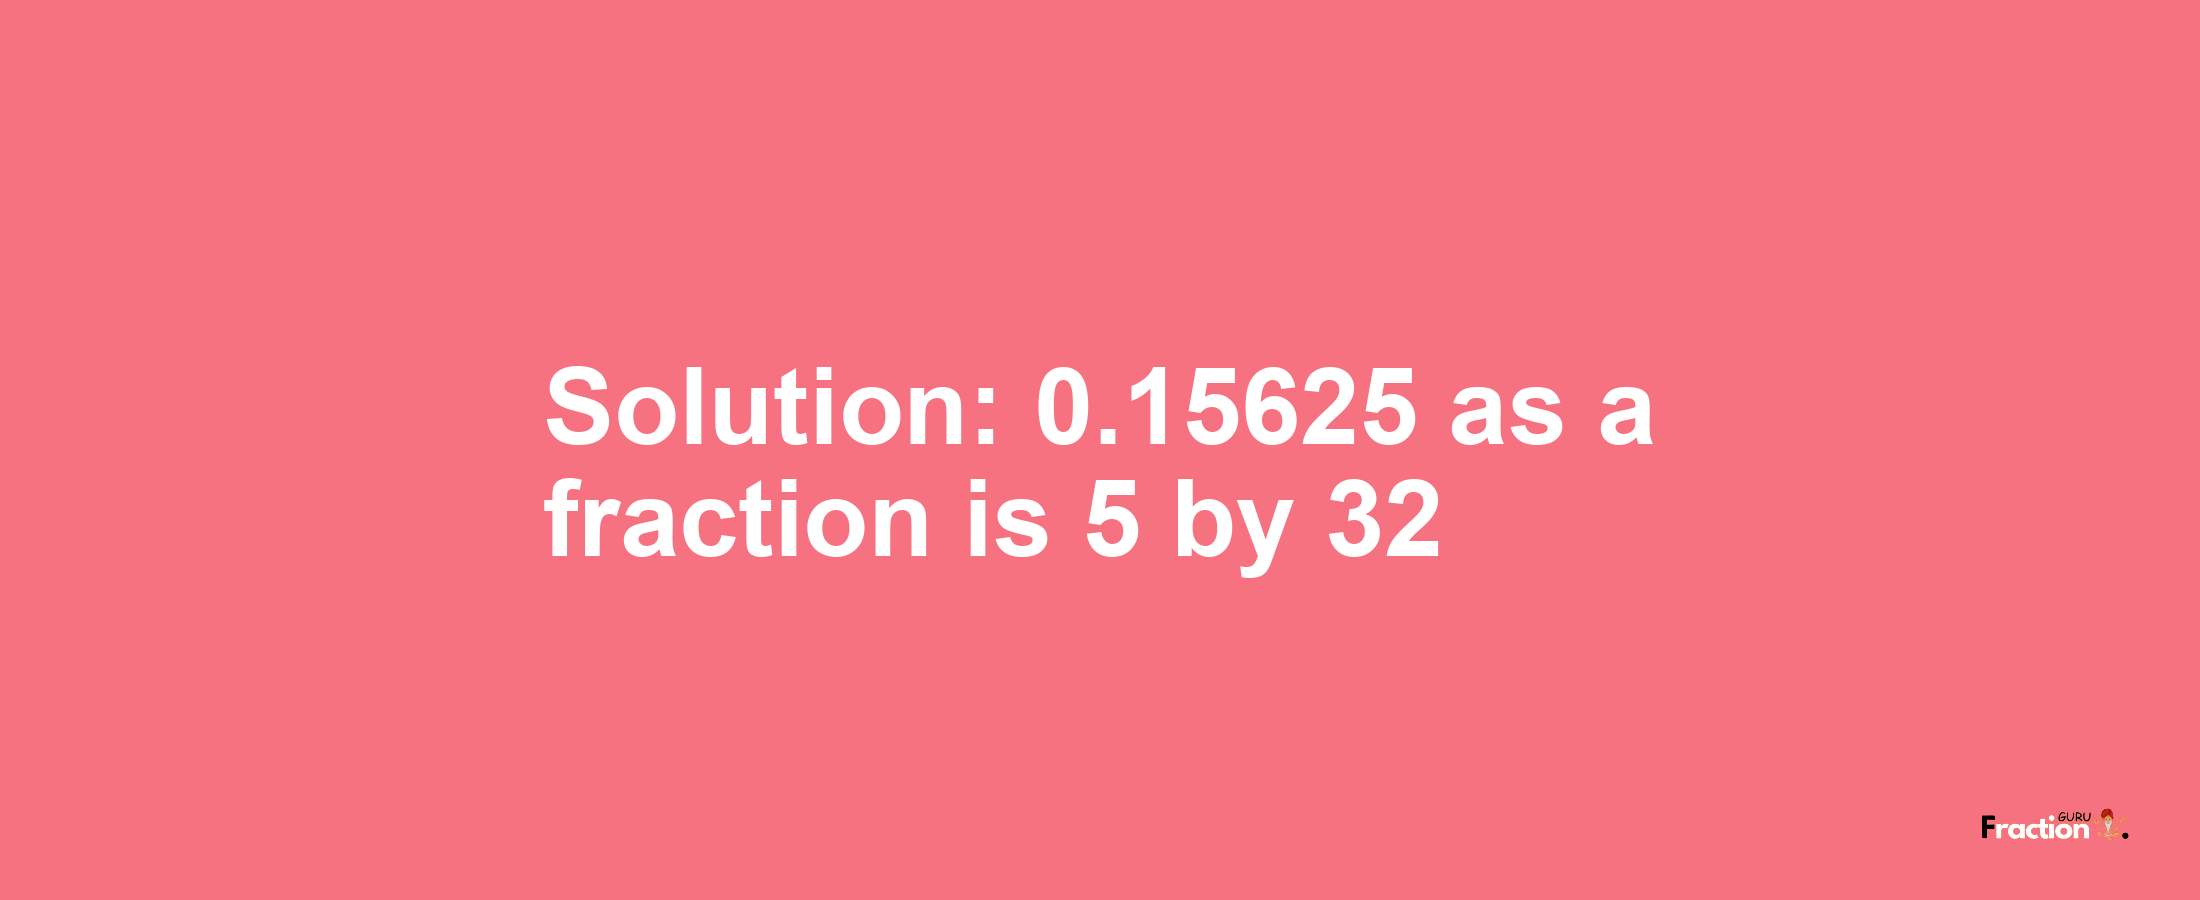 Solution:0.15625 as a fraction is 5/32